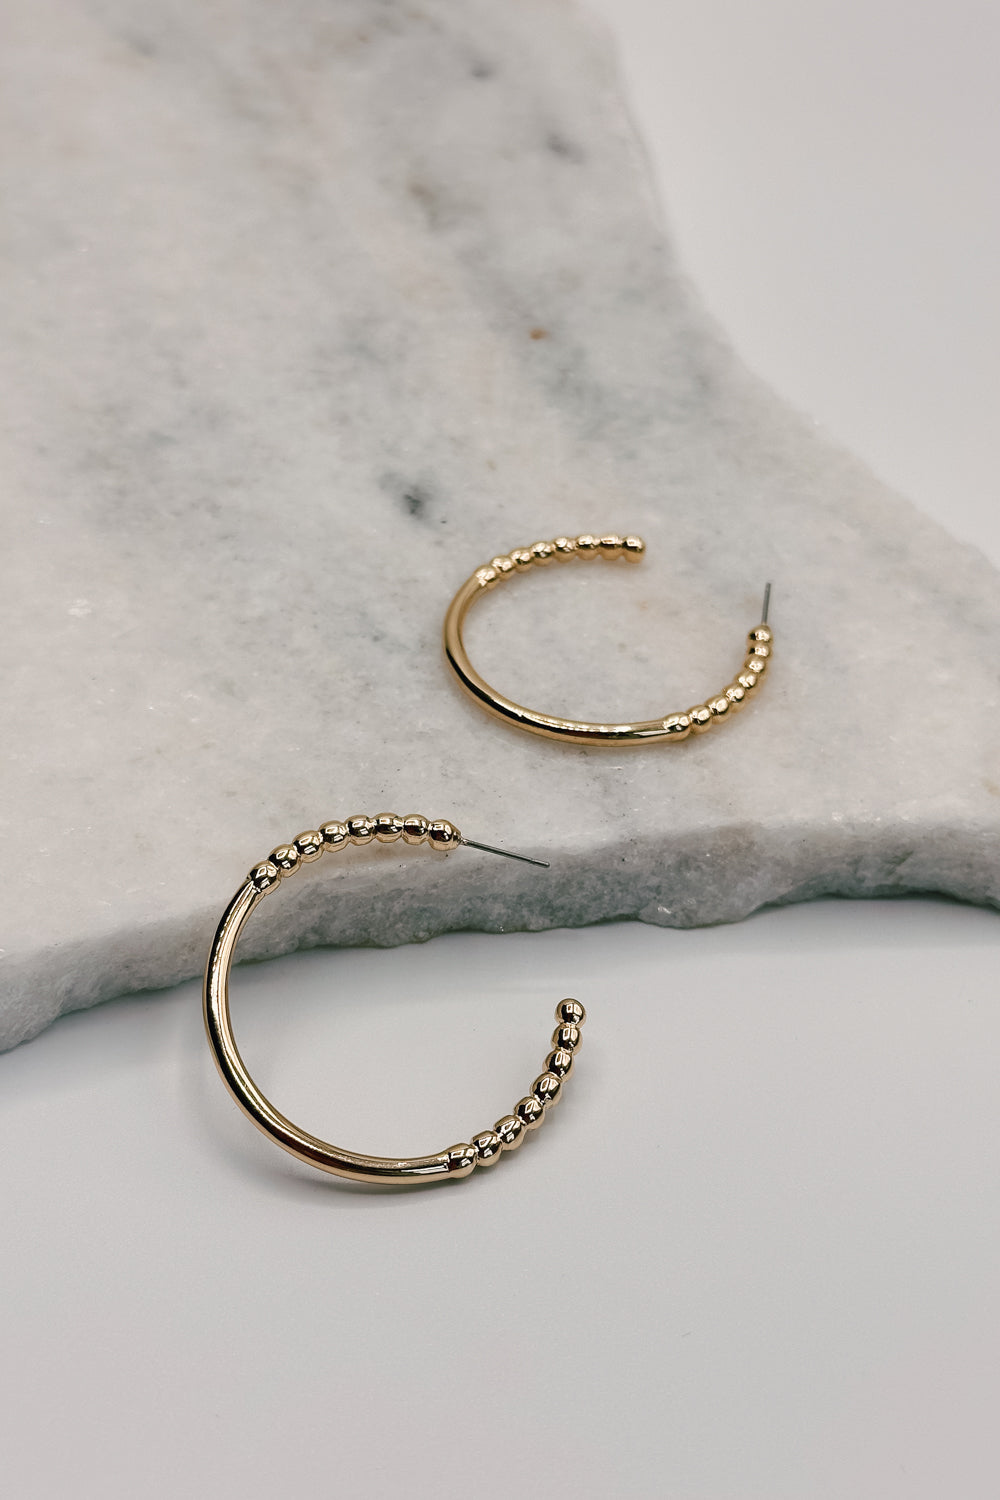 Close up view of the Alaina Gold Dipped Bead Hoop Earring. the earring features gold dipped half beaded hoops